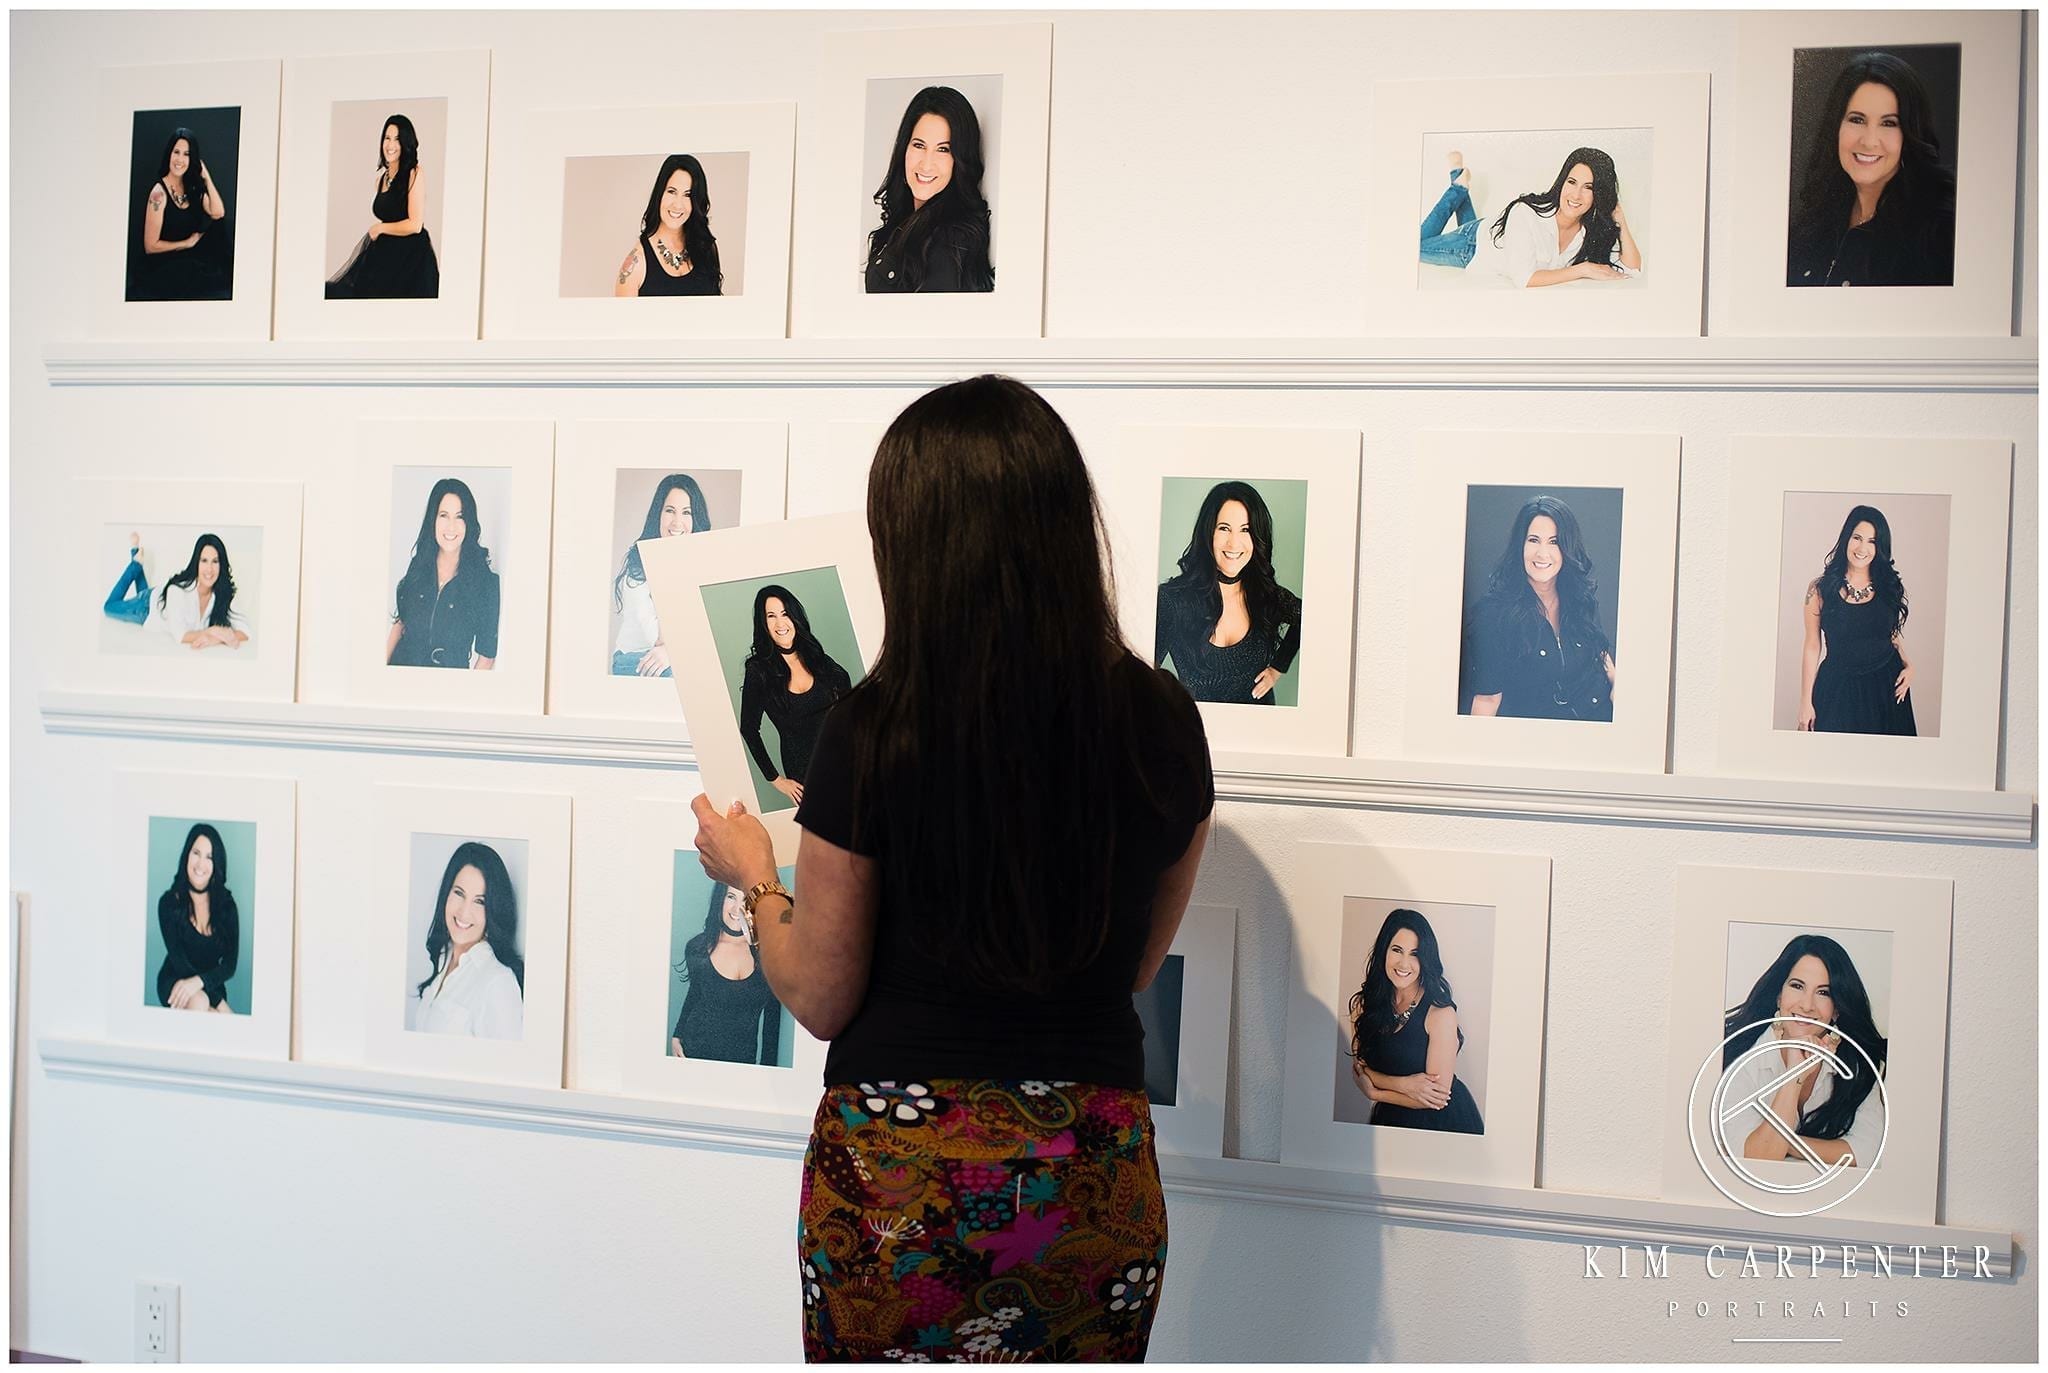 A woman standing and looking at professional headshots on shelves.